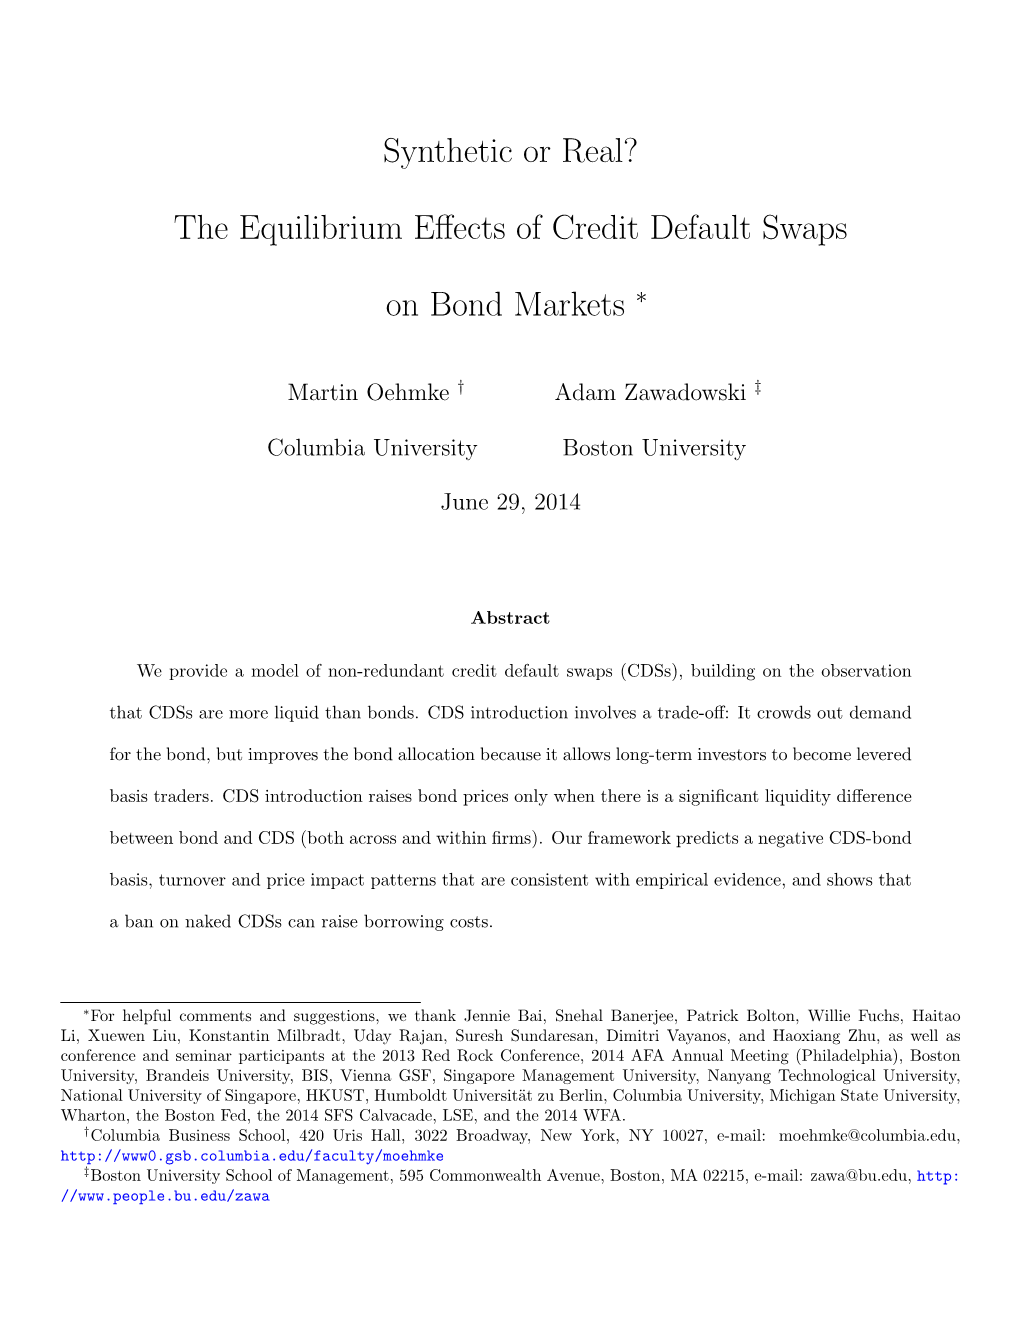 The Equilibrium Effects of Credit Default Swaps on Bond Markets